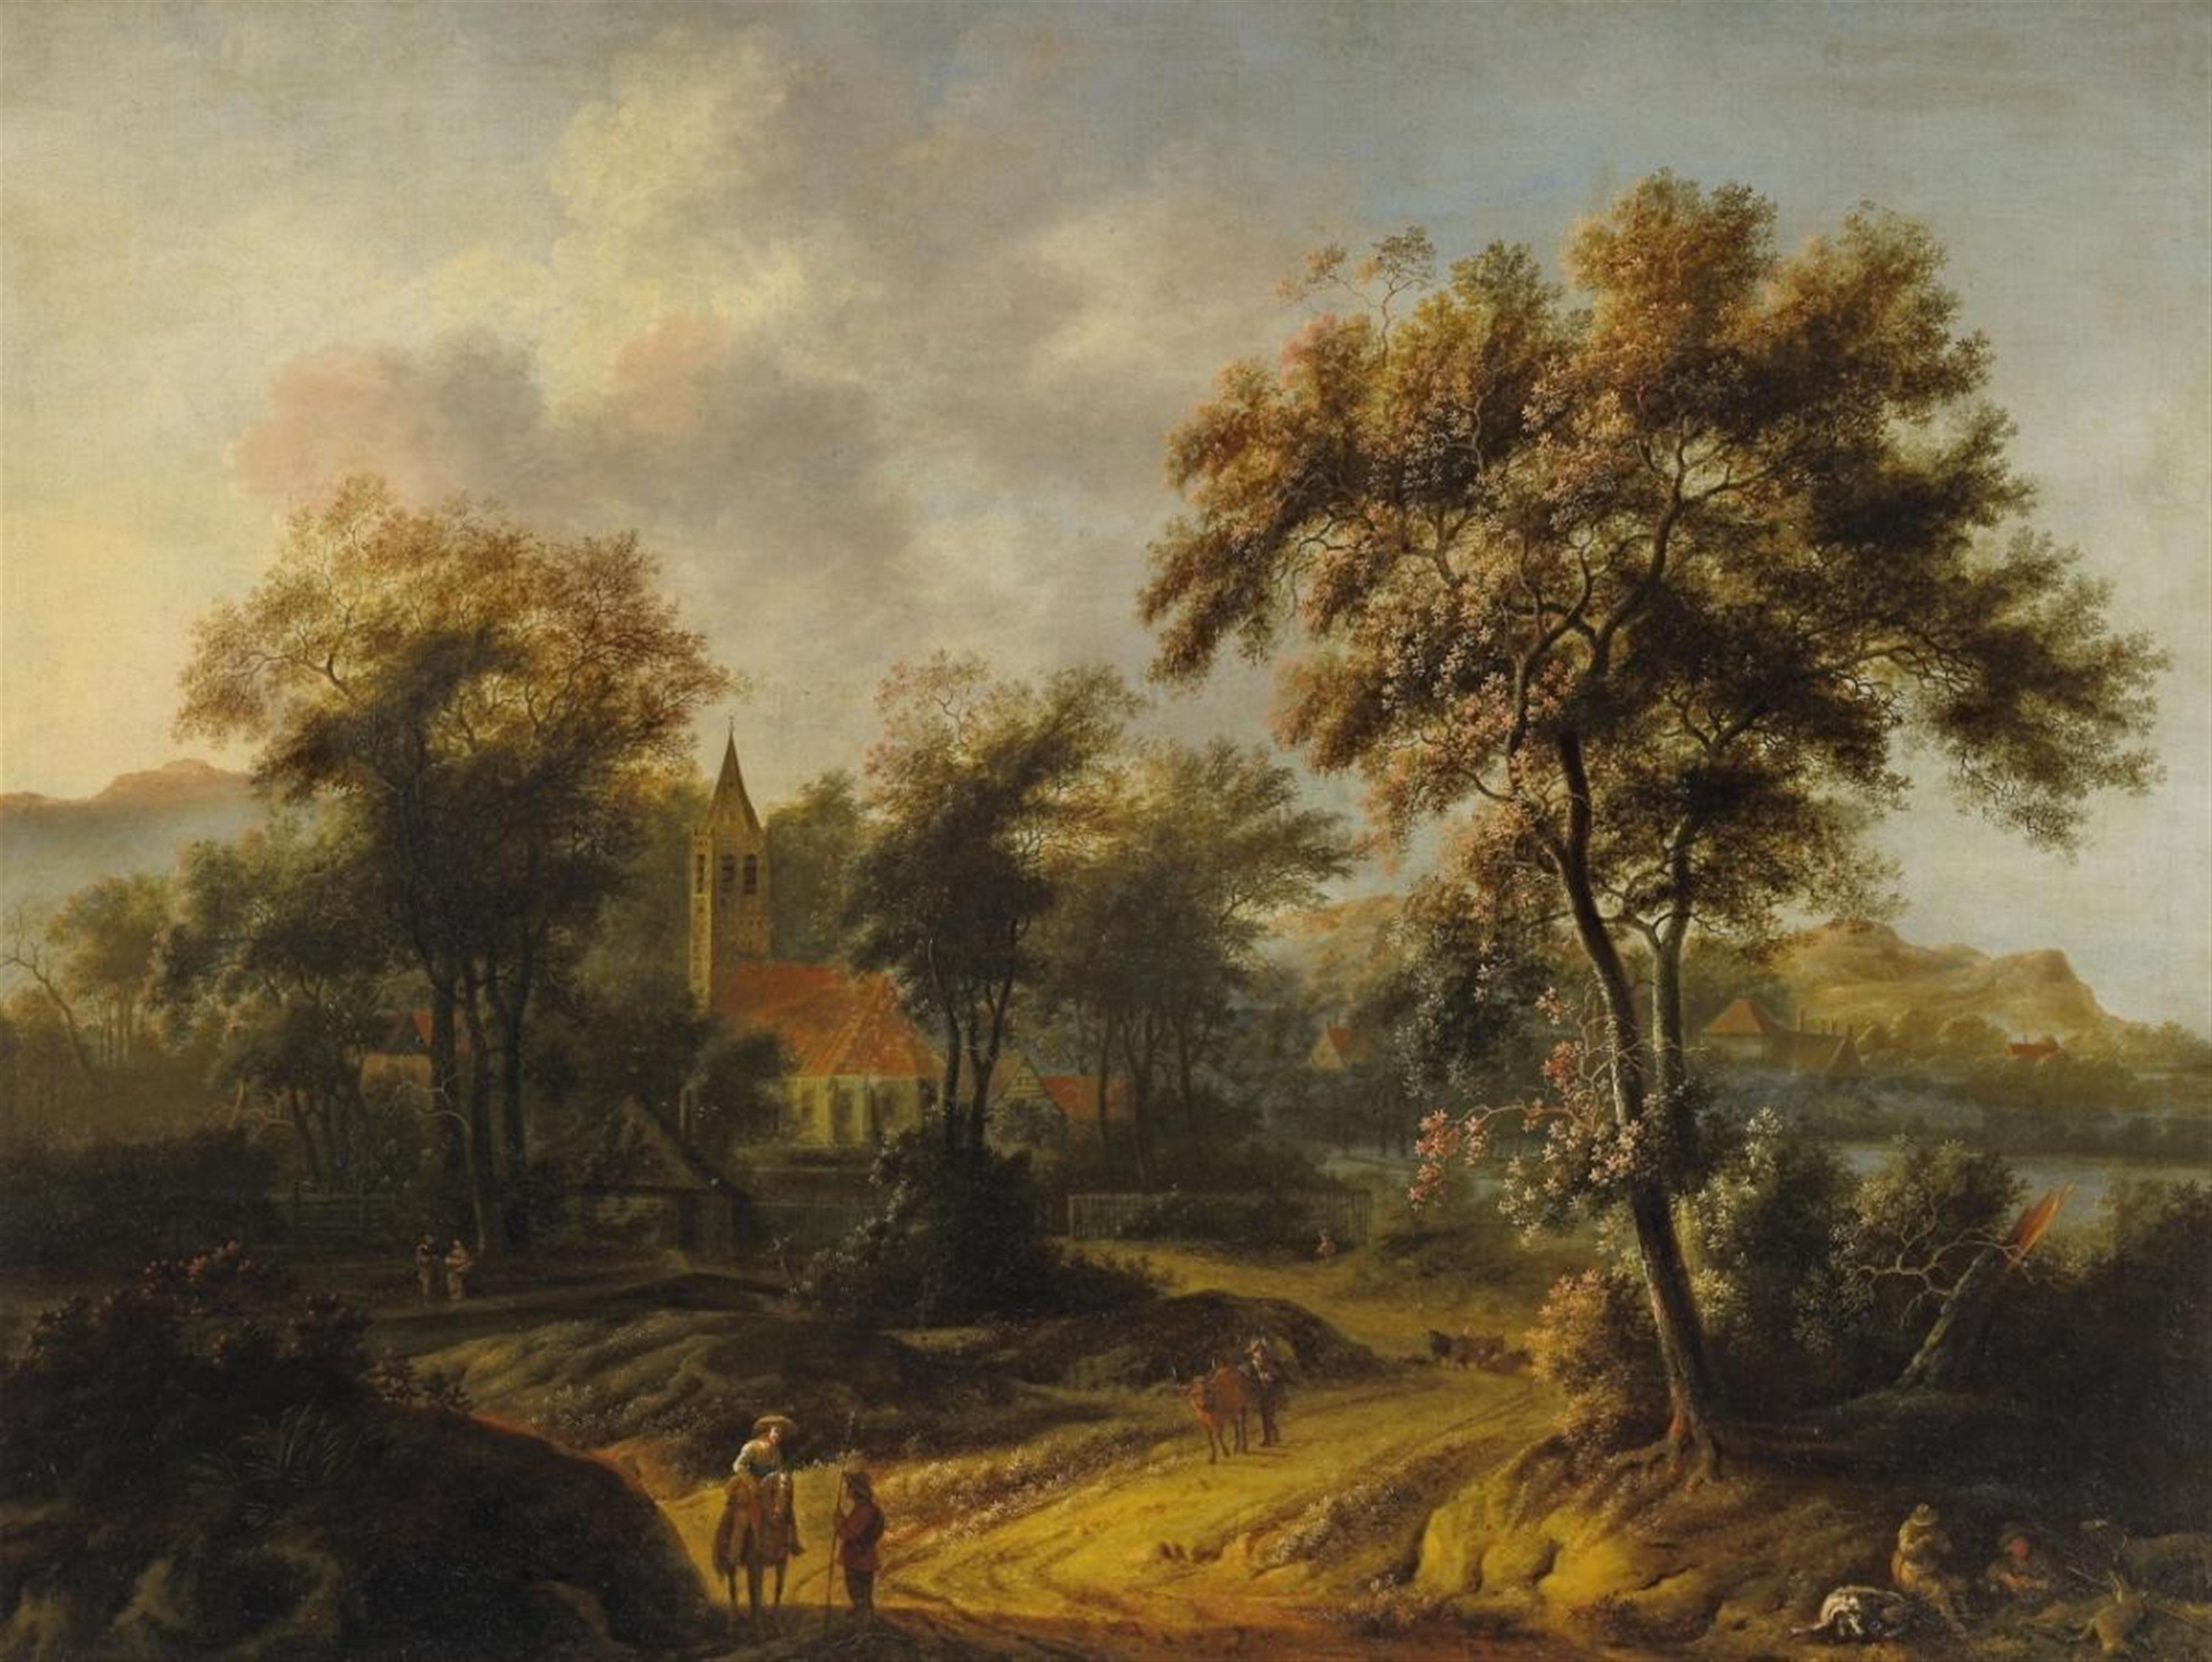 Jacob van der Croos - WOODED LANDSCAPE WITH CHURCH AND RIDERS - image-1